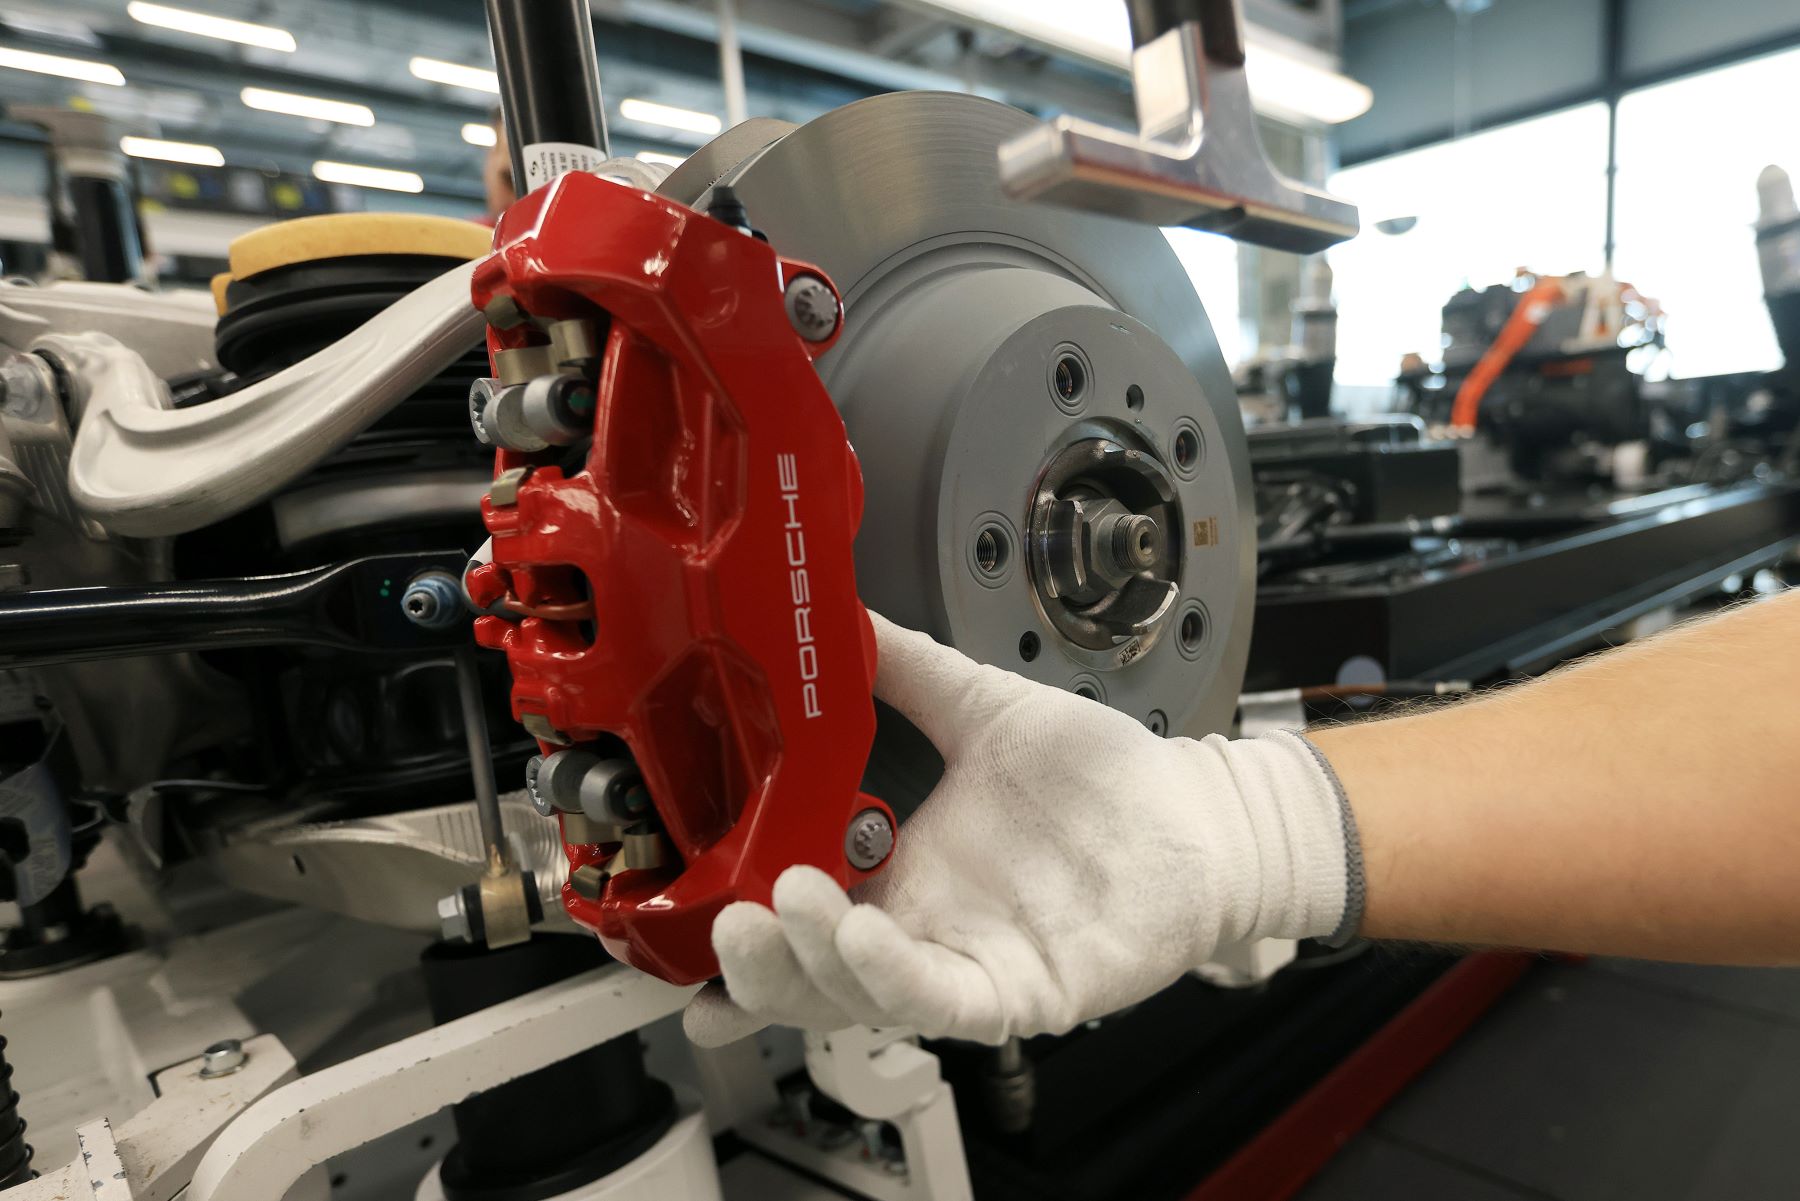 The brake caliper and rotor of an all-electric Porsche Taycan EV during production in Stuttgart, Germany